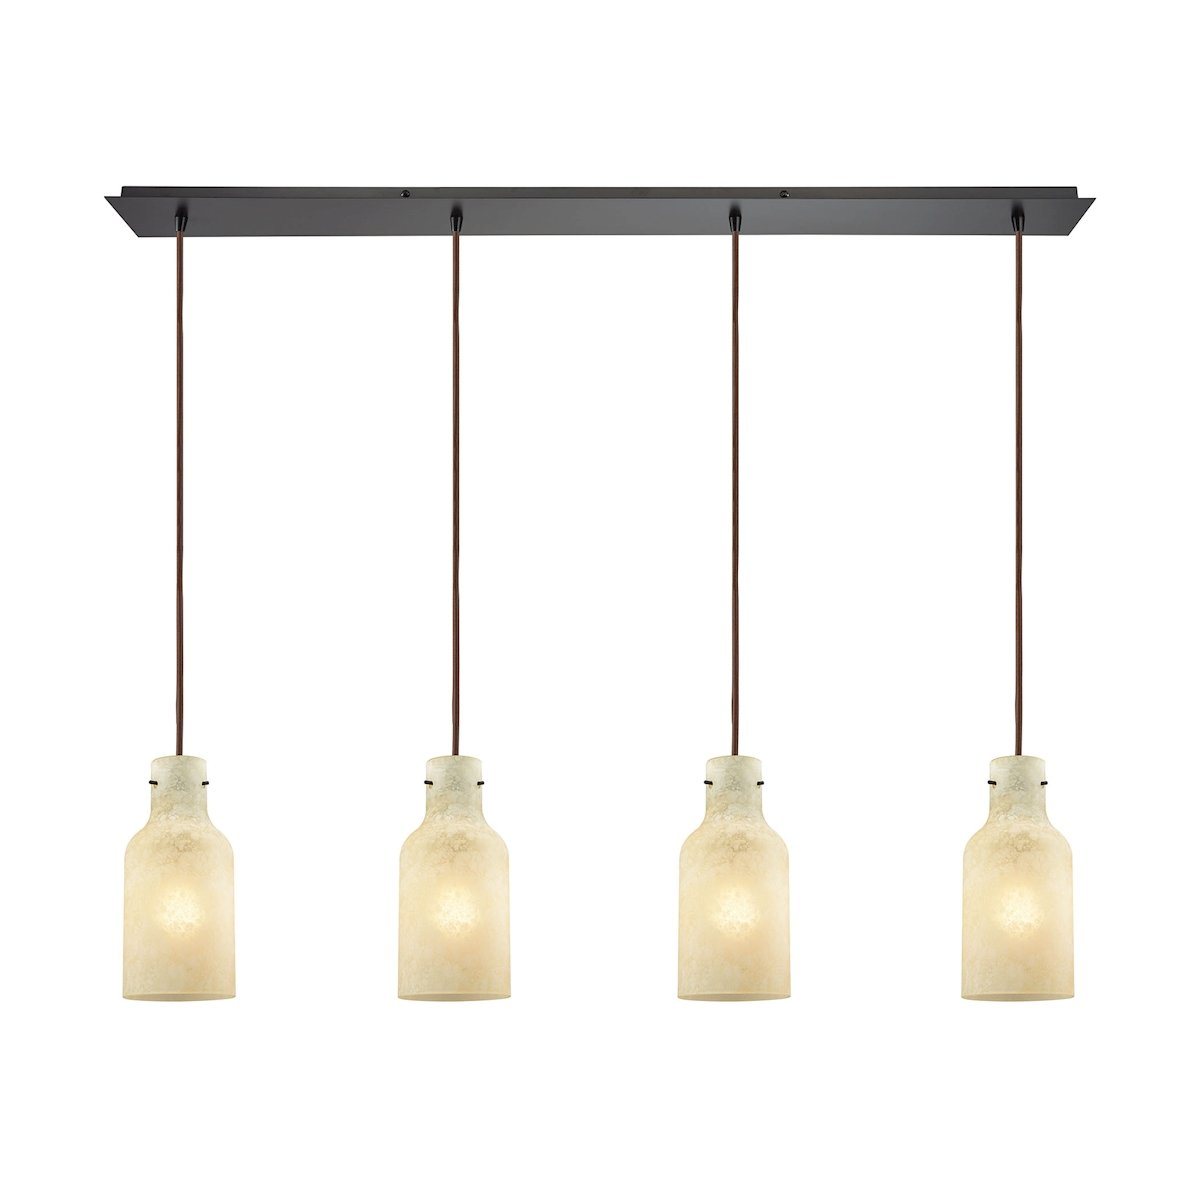 Weatherly 4 Light Linear Pan Pendant In Oil Rubbed Bronze With Chalky Beige Glass Ceiling Elk Lighting 